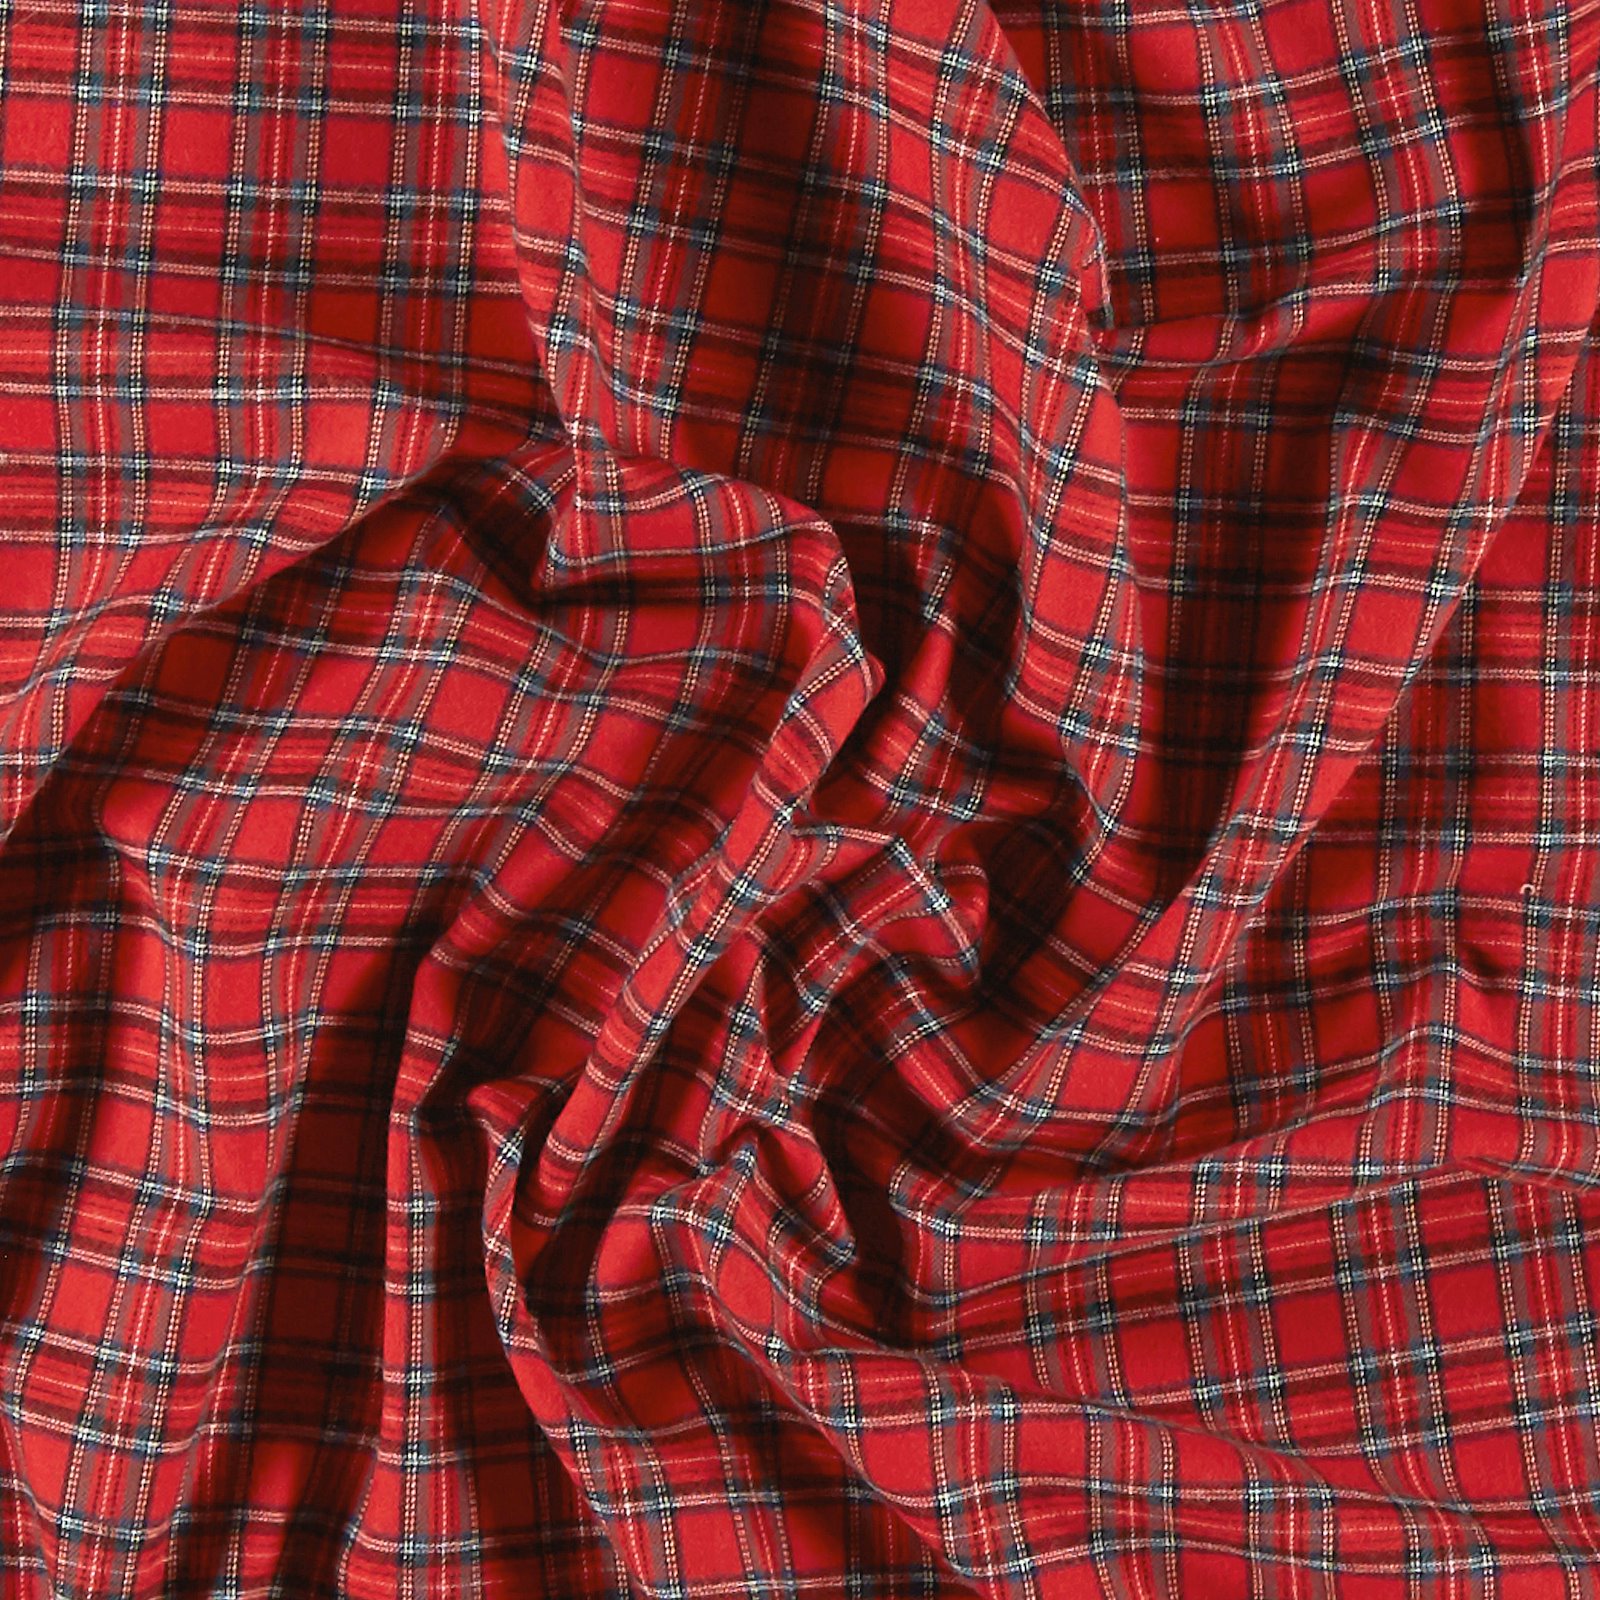 Woven cotton red/nature/green YD check 500314_pack